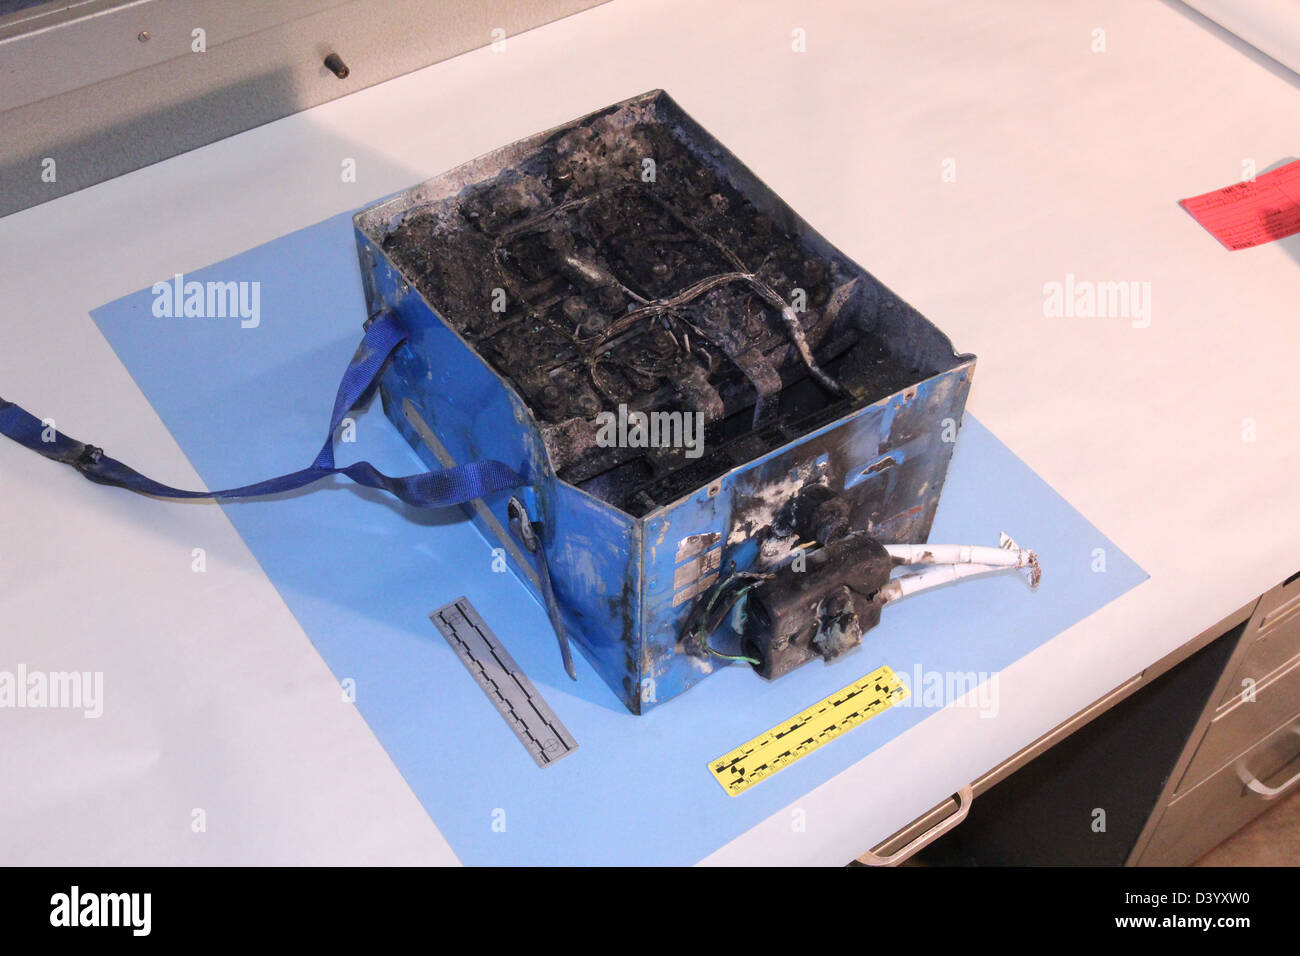 NTSB photos of the burned auxiliary power unit battery from a JAL Boeing 787 that caught fire on January 7, 2013 at Boston's Logan International Airport. The dimensions of the battery are 19x13.2x10.2 inches and it weighs approximately 63 pounds Stock Photo